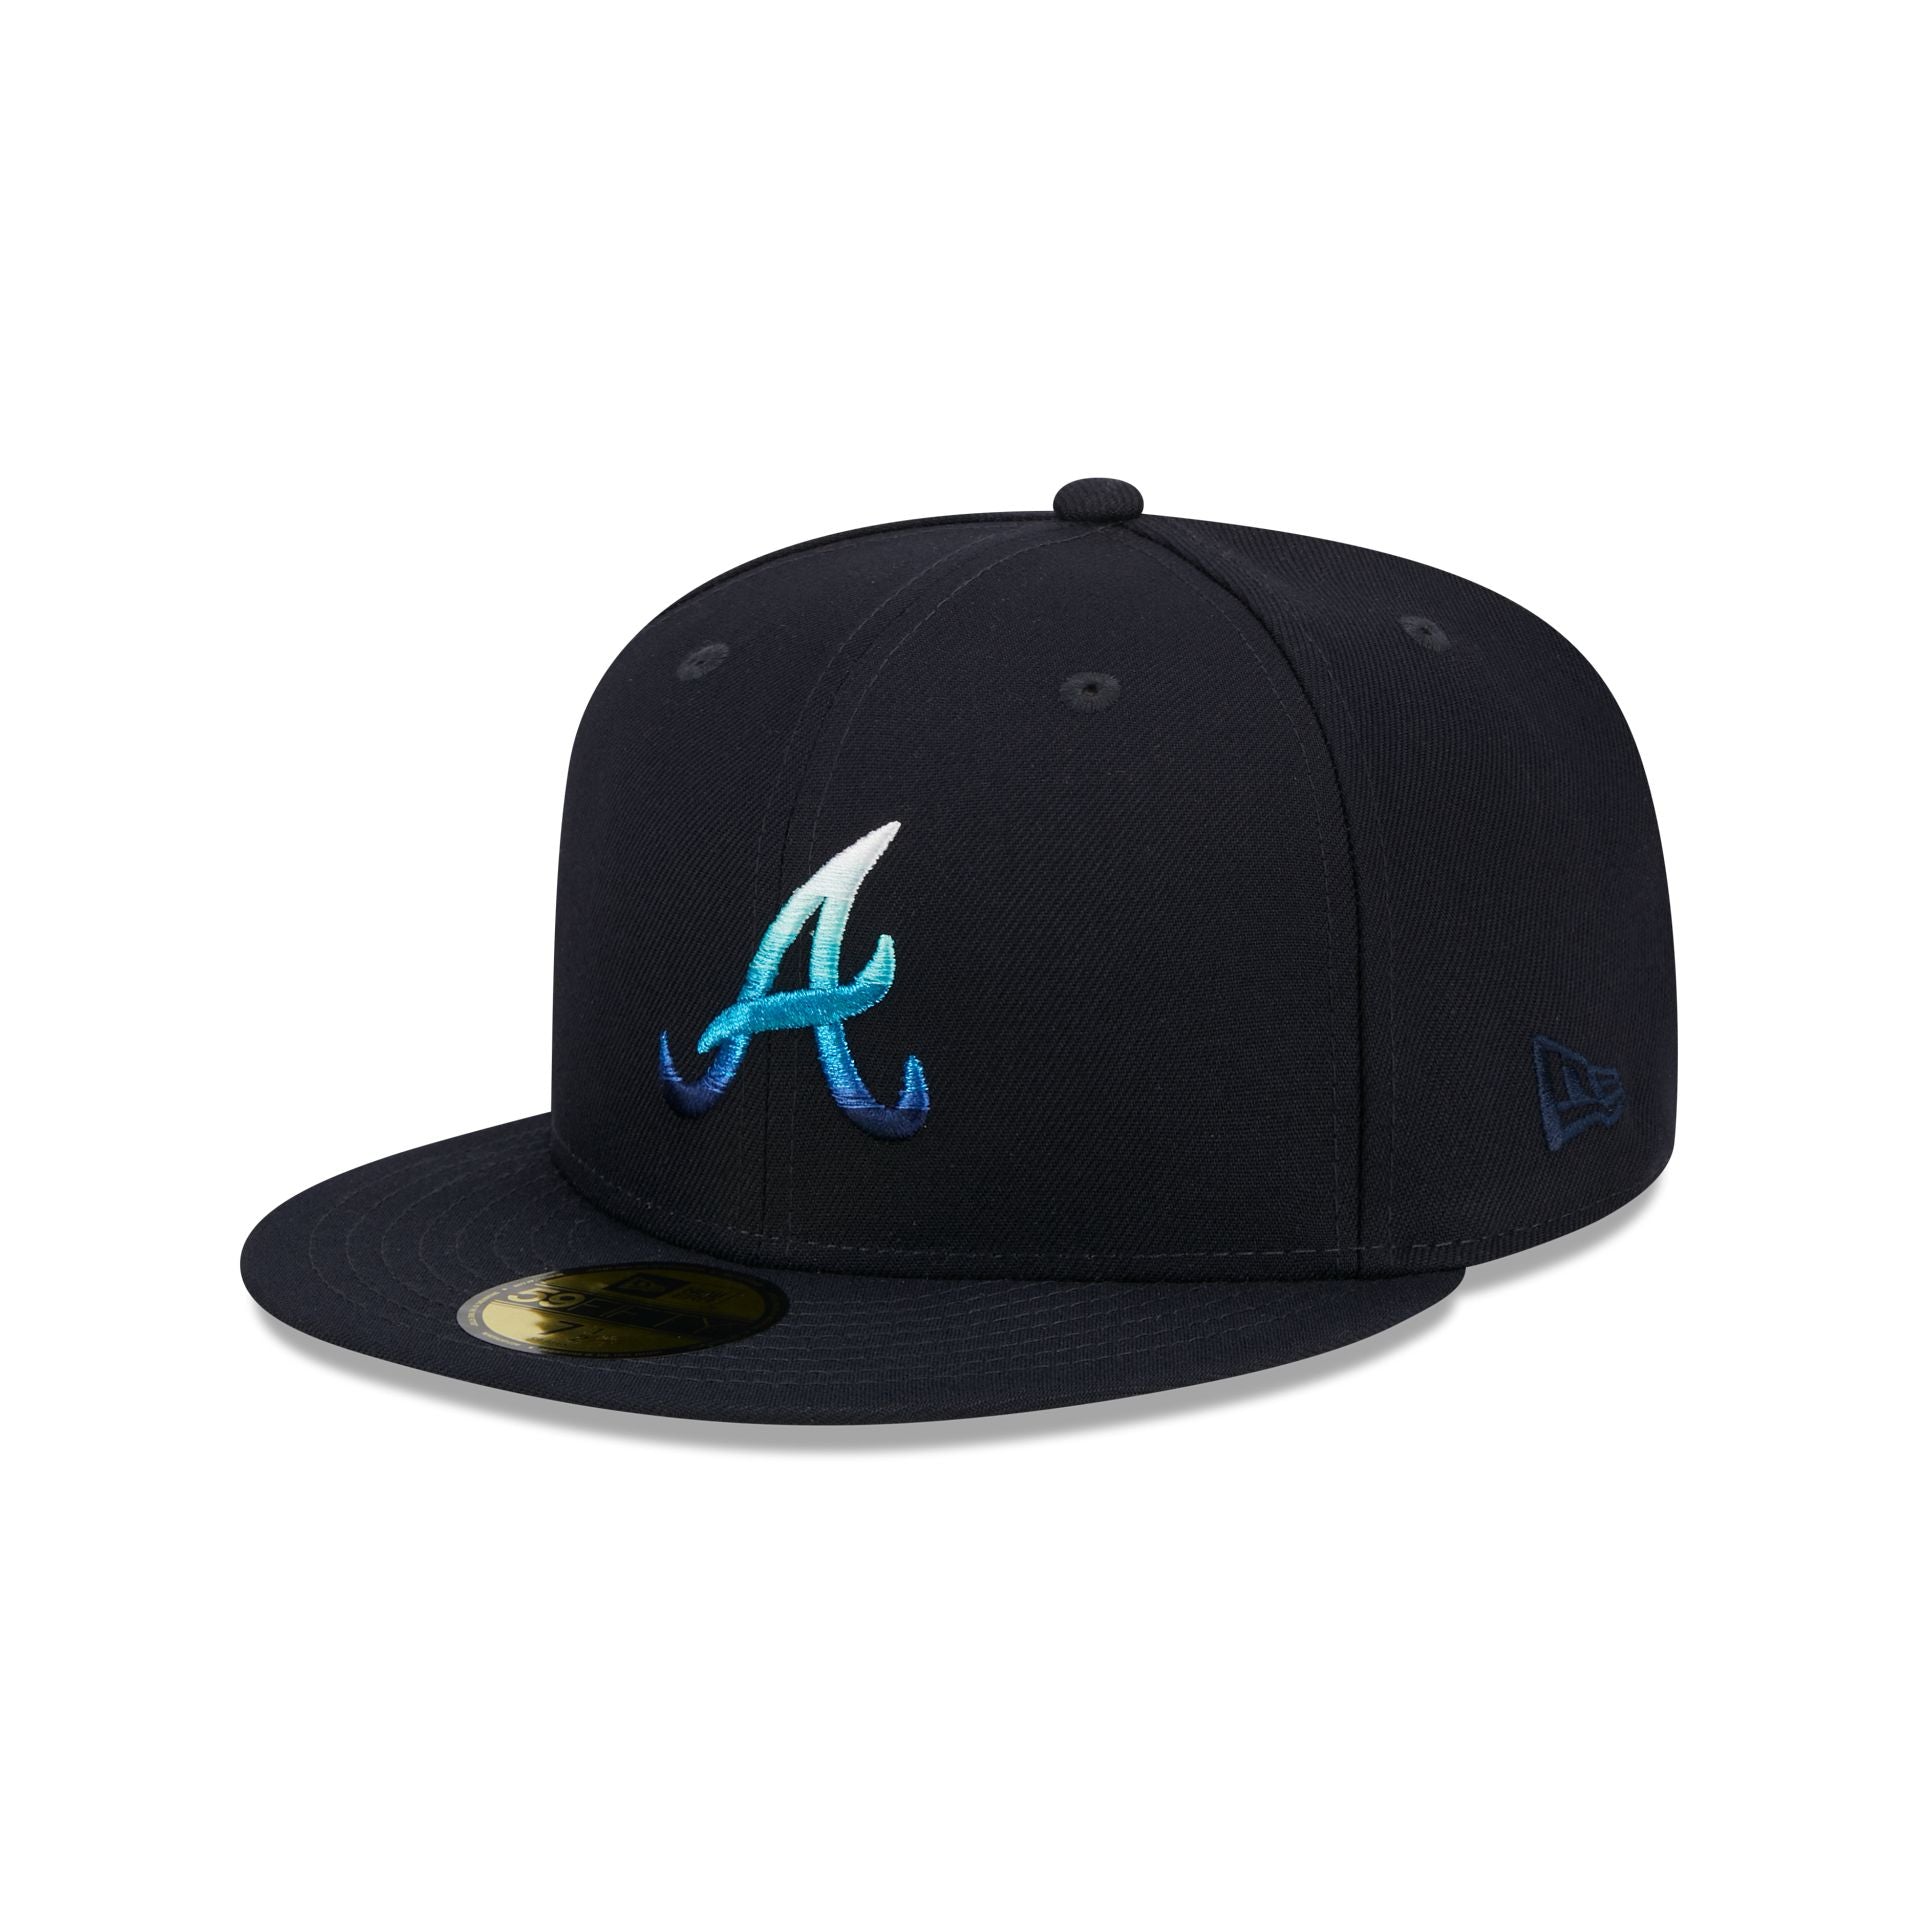 ATLANTA BRAVES New Era 59fifty Hat Cap Blue With Red Stripes